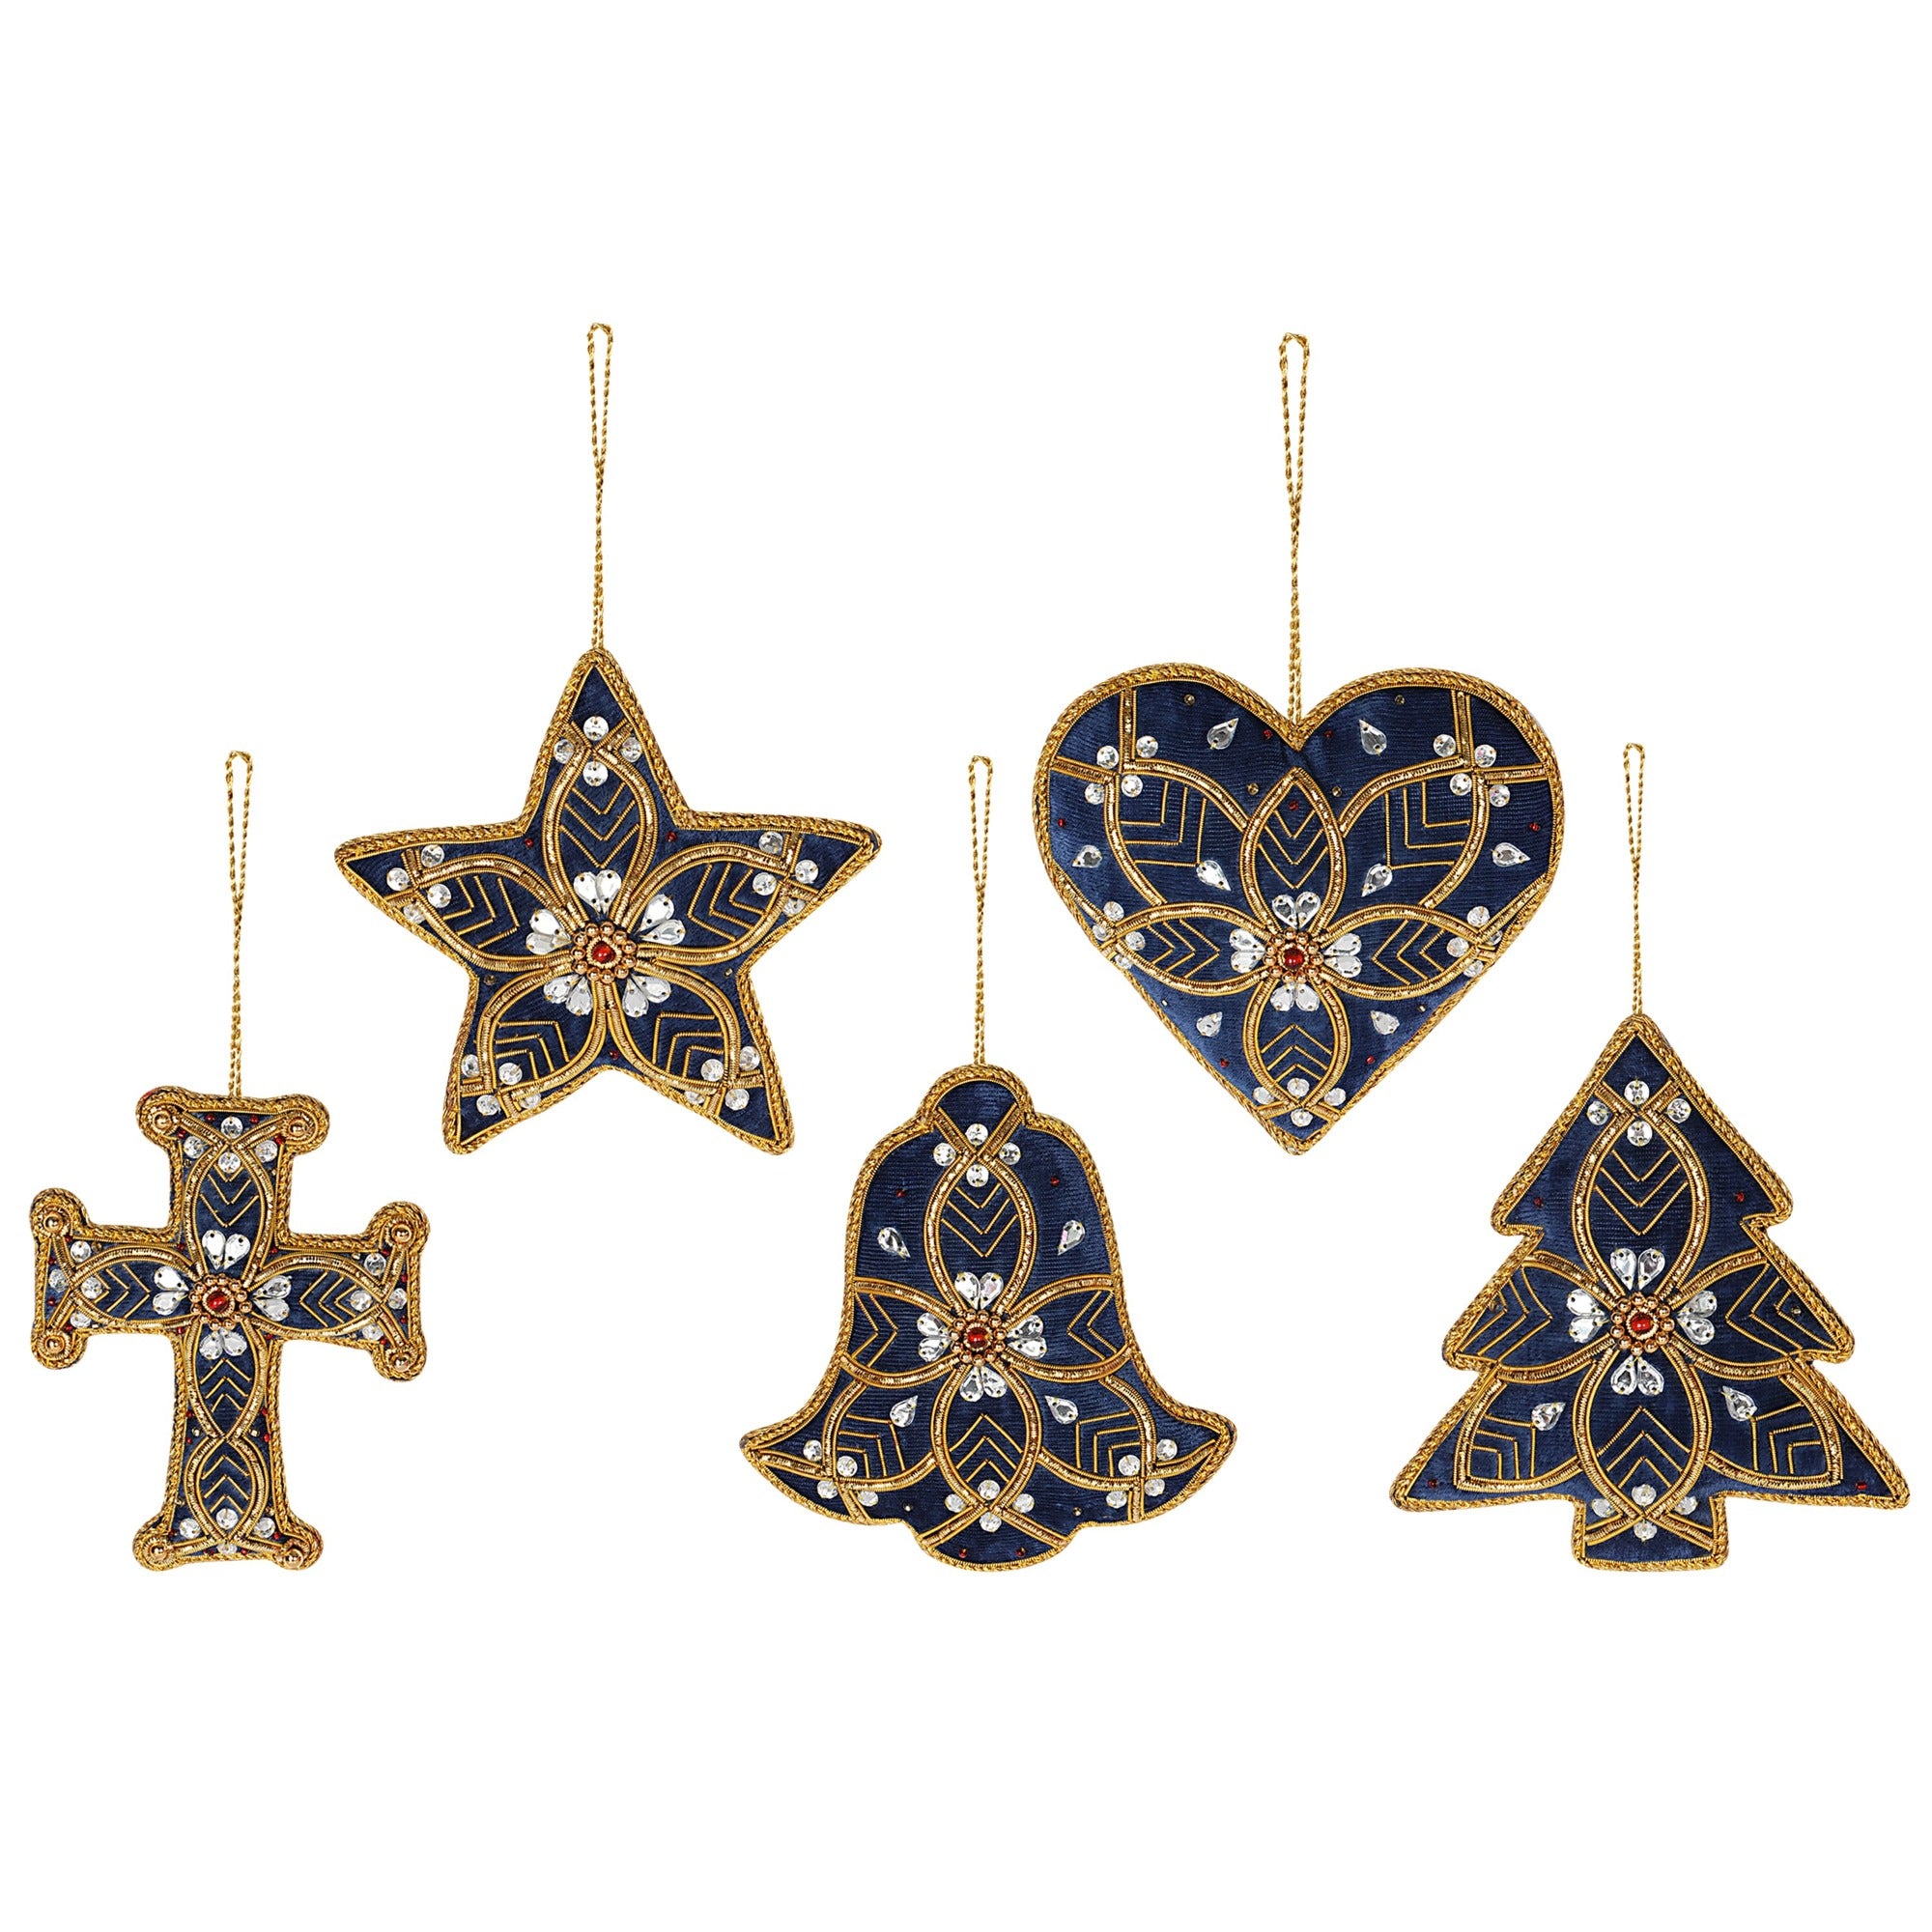 Holiday Fun-Stars, Hearts, Cross, Bell & tree Christmas ornaments set of 5 pieces for holiday decor (1SET=5PC)